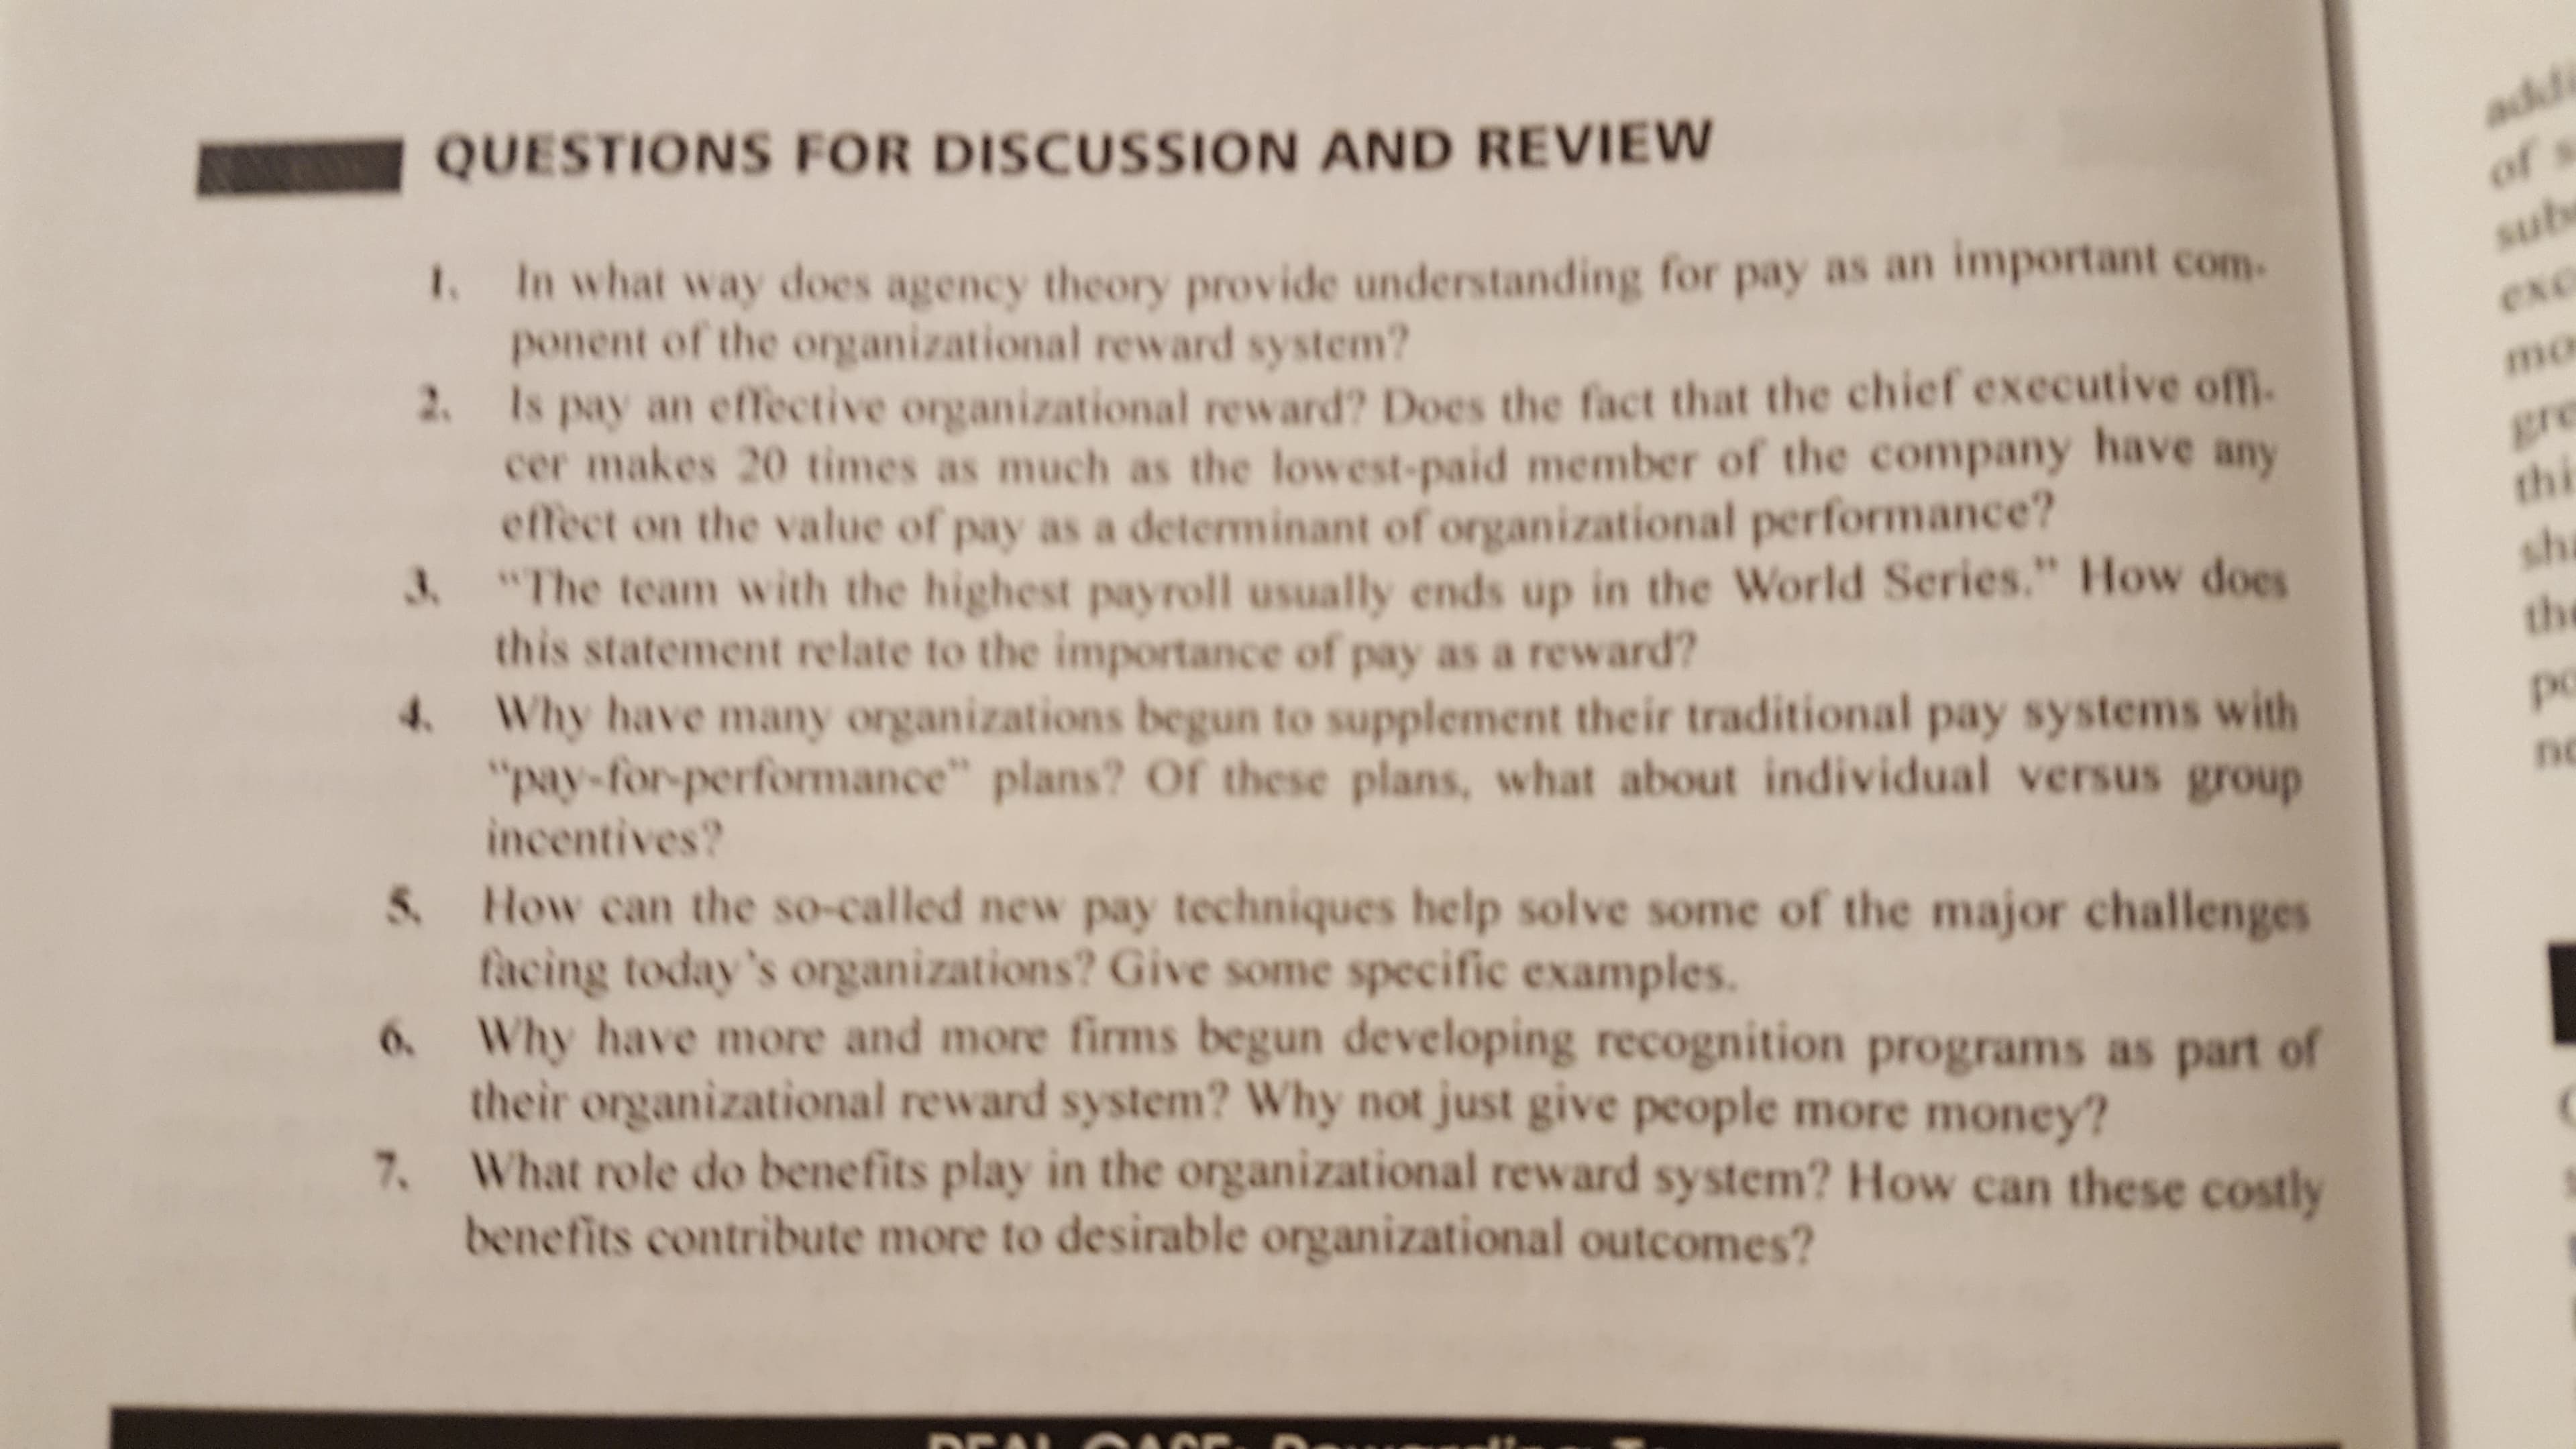 QUESTIONS FOR DISCUSSION AND REVIEW
t. In what way does agency theory provide understanding for pay as an important com
ponent of the organizational reward system?
mo
2 Is pay an effective organizational reward? Does the fact that the chief executive ofm.
cer makes 20 times as much as the lowest-paid member of the company have any
effect on the value of pay as a determinant of organizational performance?
The team with the highest payroll usually ends up in the World Series." How does
this statement relate to the importance of pay as a reward?
thi
sh
the
po
nc
4 Why have many organizations begun to supplement their traditional pay systems with
"pay-for-performance" plans? Of these plans, what about individual versus group
incentives?
S. How can the so-called new pay techniques help solve some of the major challenges
. Why have more and more firms begun developing recognition programs as part of
7. What role do benefits play in the organizational reward system? How can these costly
facing today's organizations? Give some specific examples.
their organizational reward system? Why not just give people more money?
benefits contribute more to desirable organizational outcomes?
